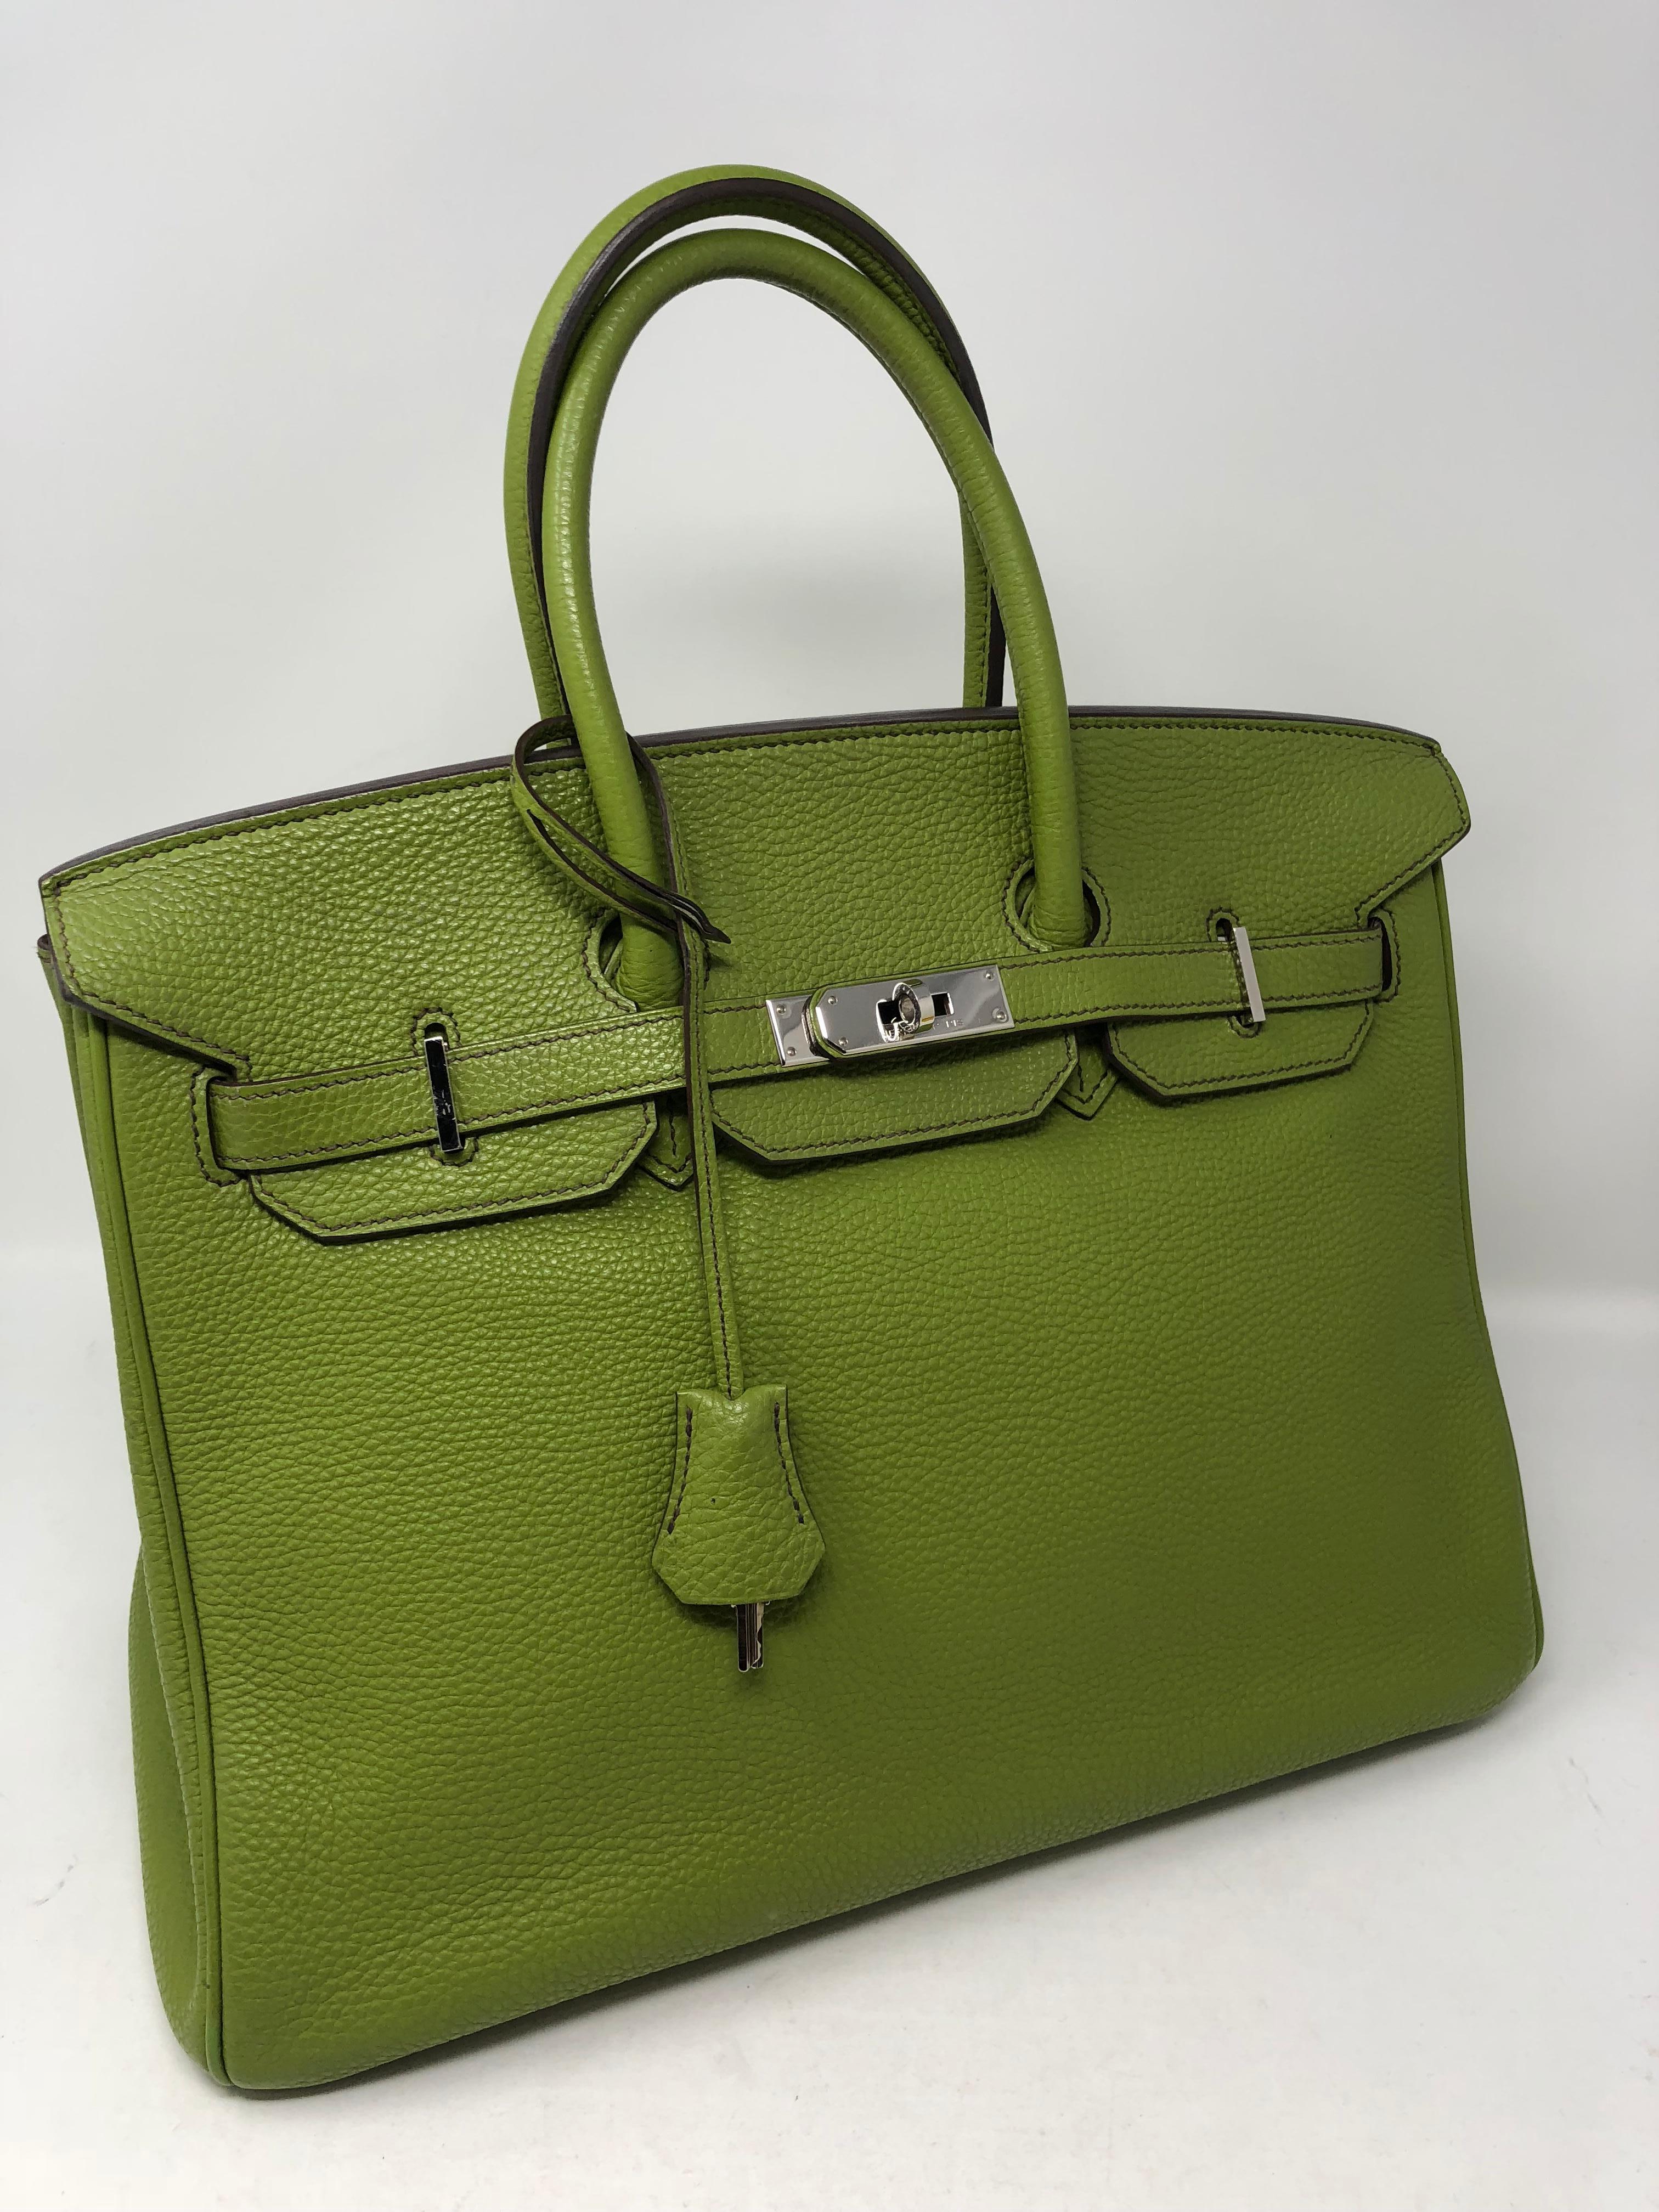 Hermes Birkin 35 Pelouse Green color. Clemence leather with palladium hardware. Good condition. In French Pelouse means lawn. This reflects the color. Unique color and stamped M. From 2009. Bag includes dust cover, clochette, lock, and  keys.